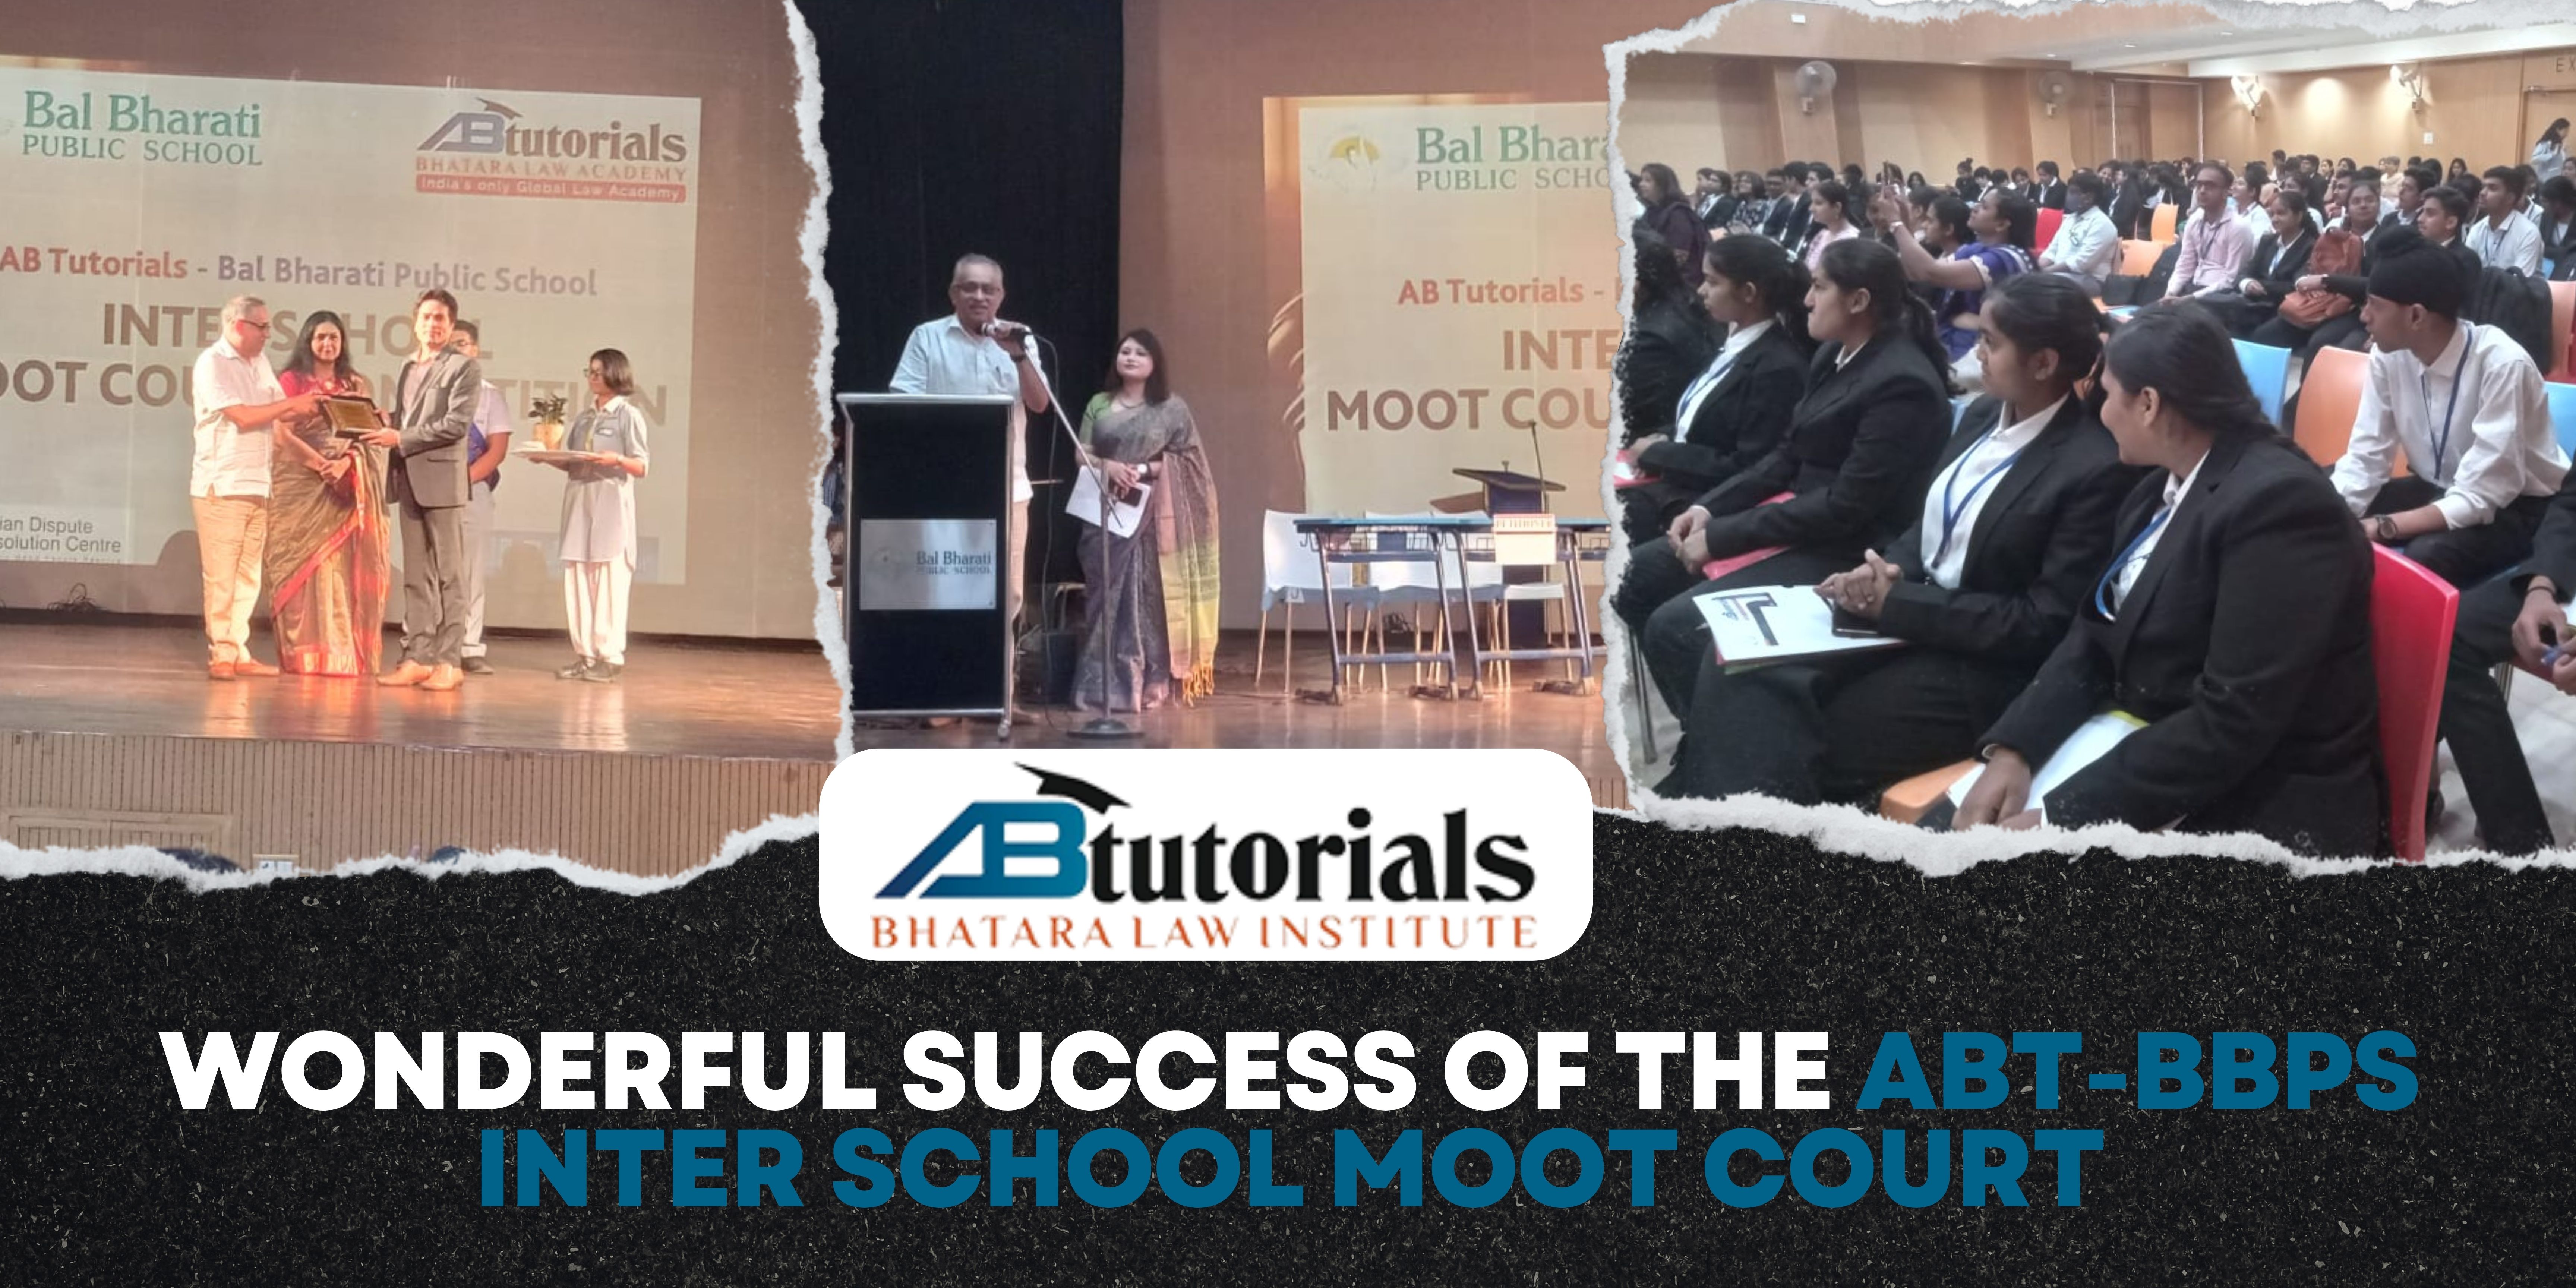 ABT-BBPS Inter School Moot Court Competitio